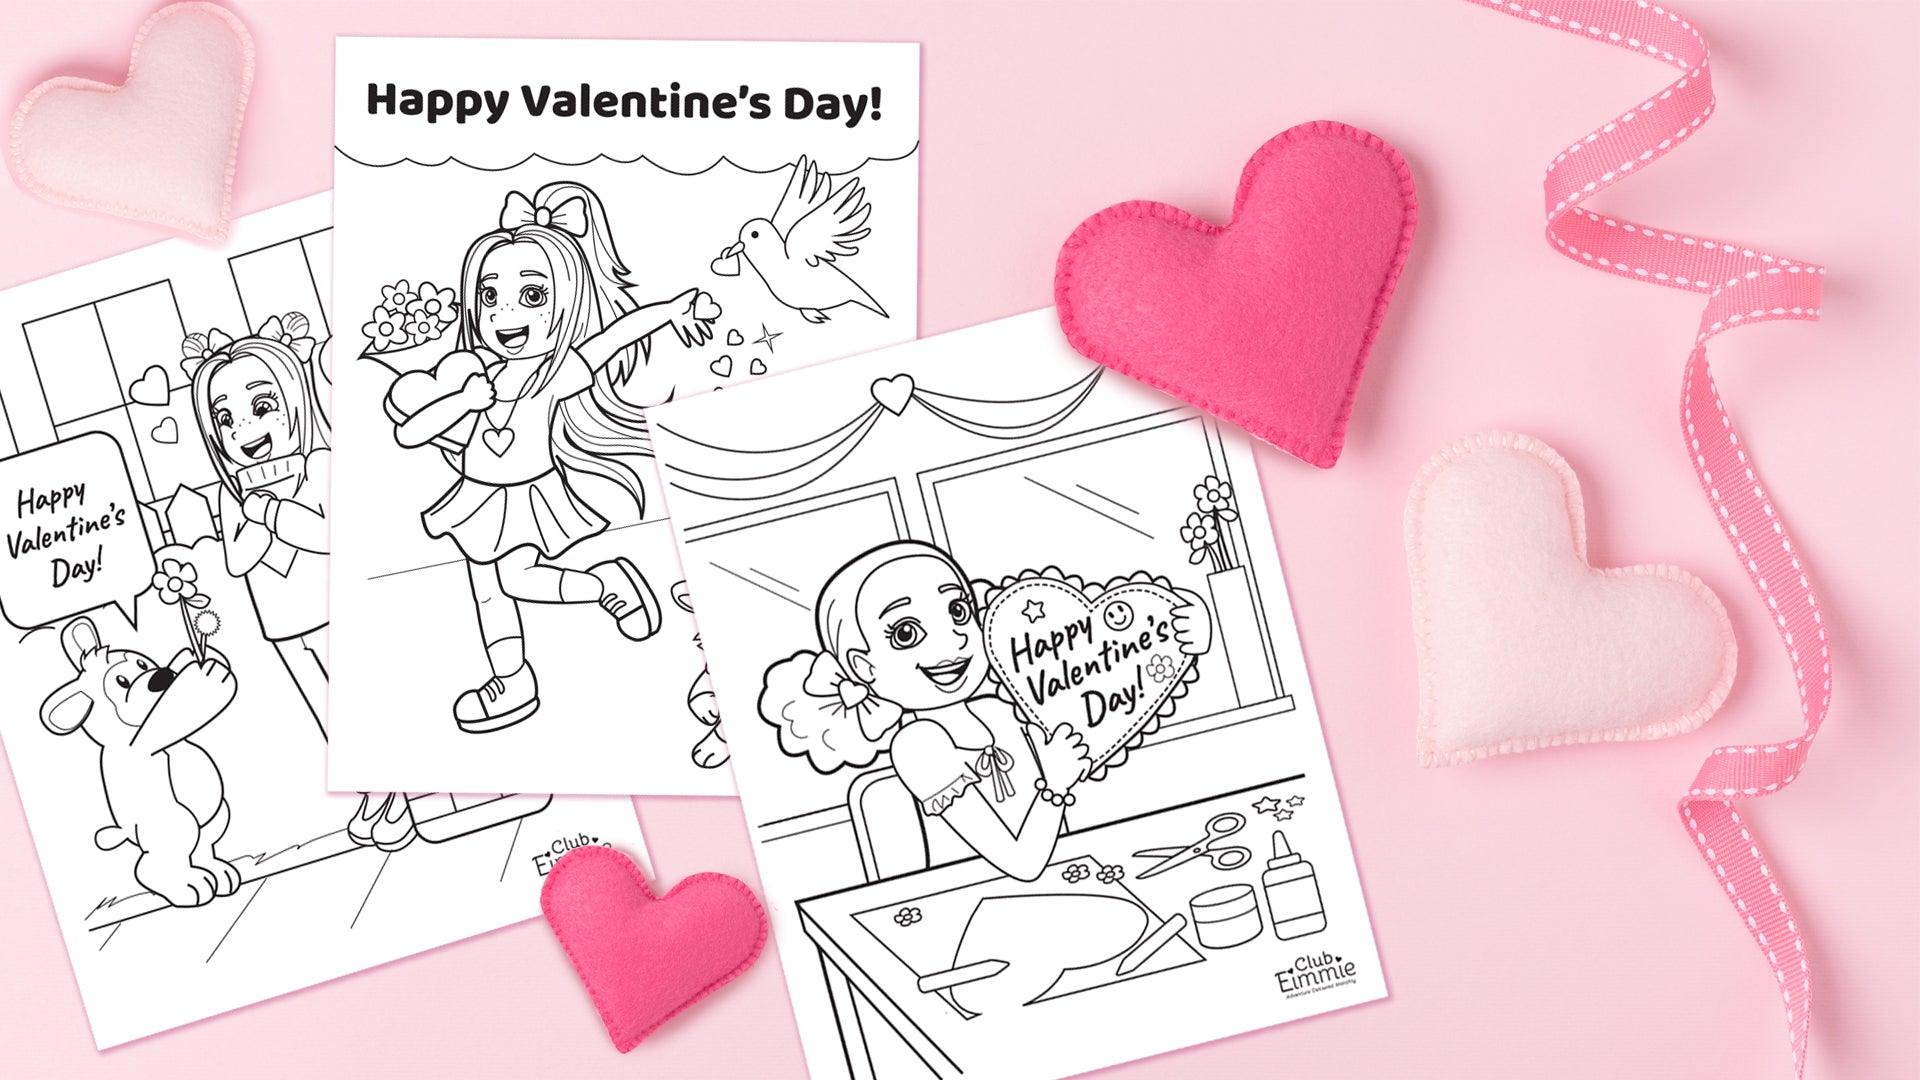 Valentines day printable coloring sheets â playtime by